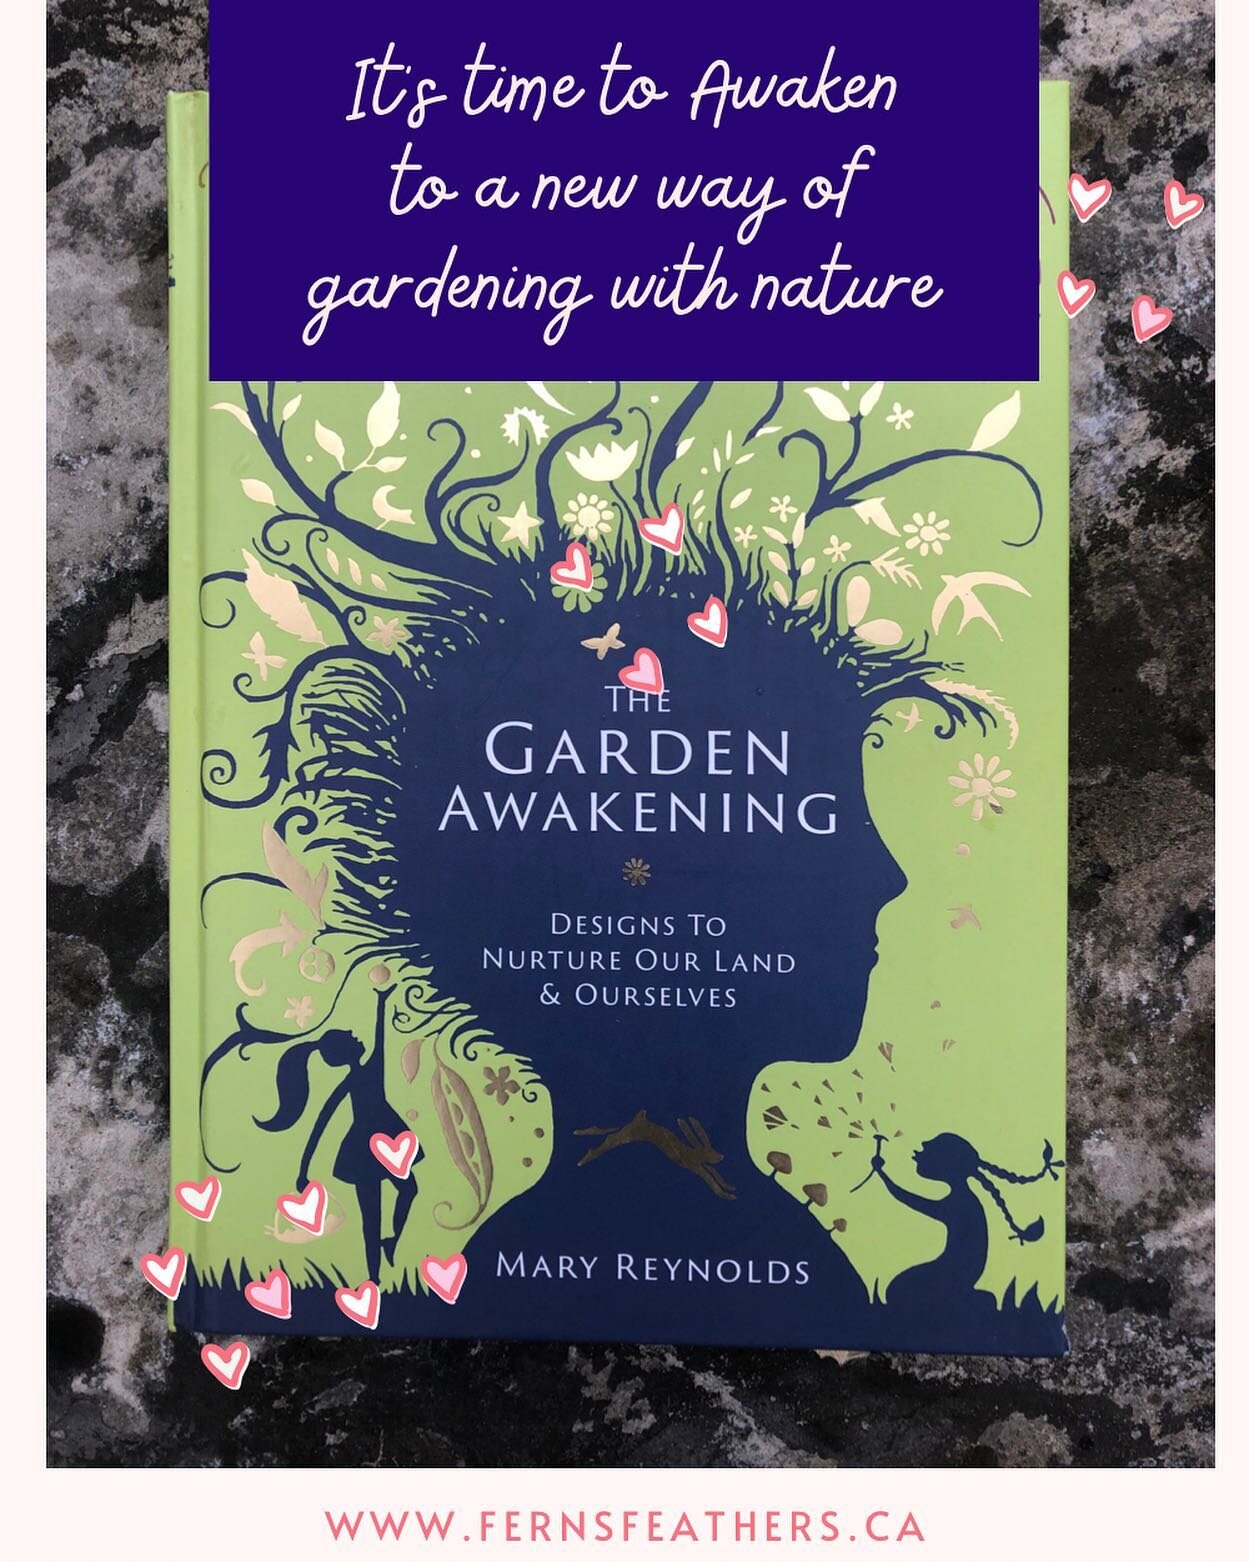 A great gardening book for anyone just itching to get into the garden season early. #betheark #wearetheark #garden #gardening #gardenawakening #woodlandgardening #nature #naturelovers #naturalgardening #nativegardendesign